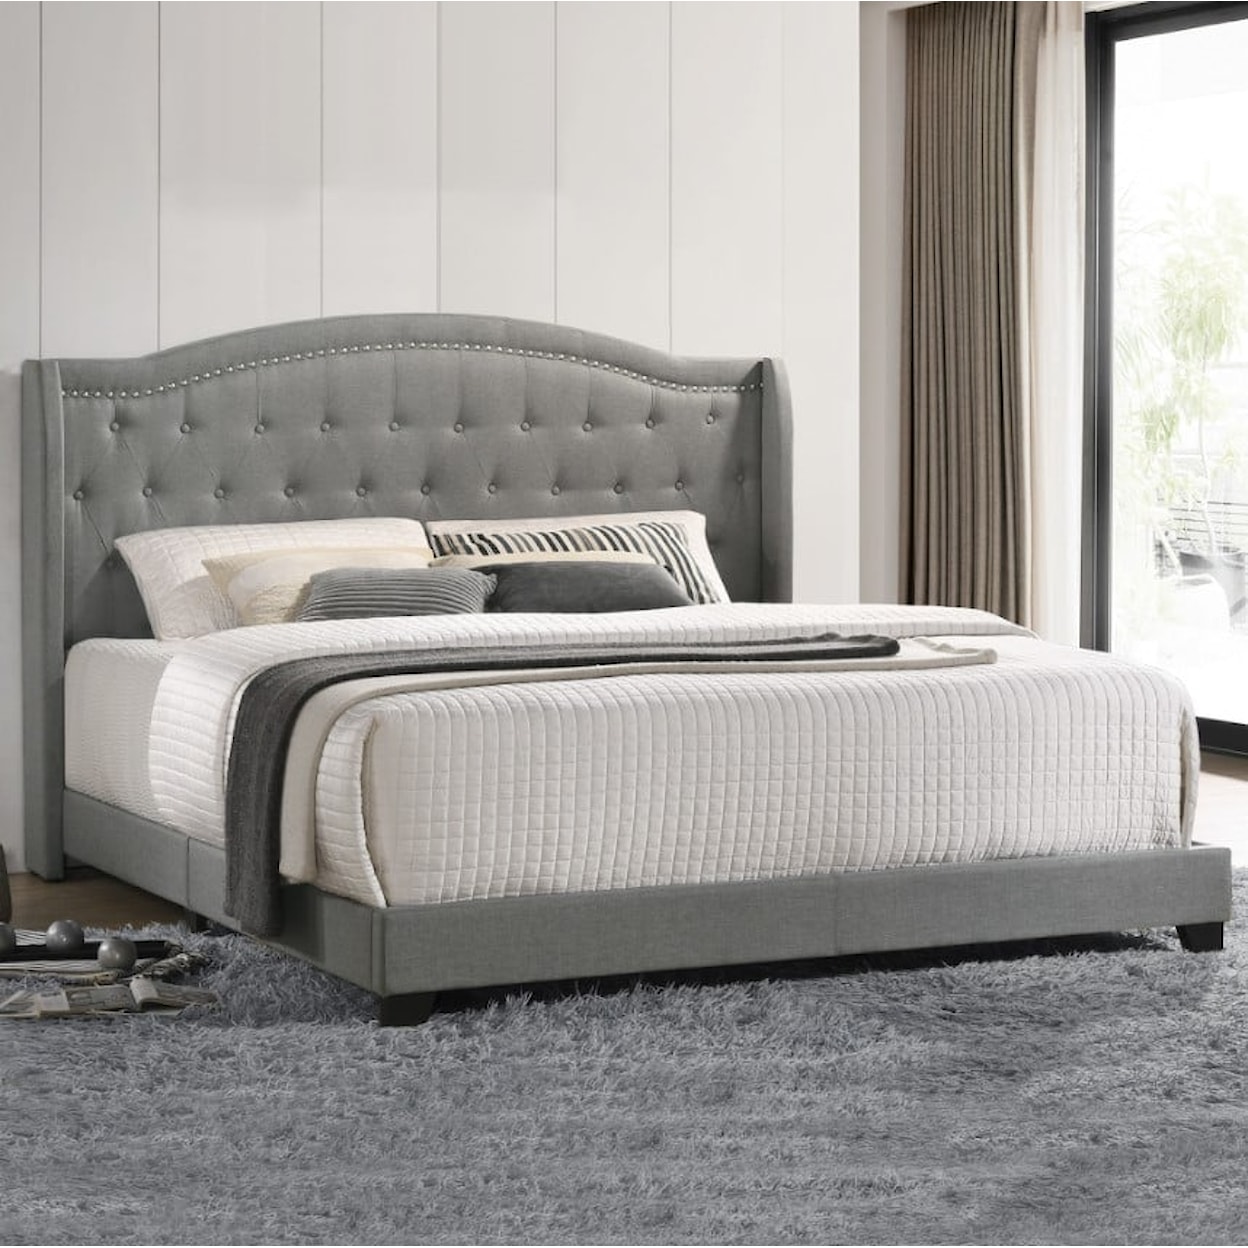 Intercon Upholstered Beds Rhyan Queen Upholstered Bed